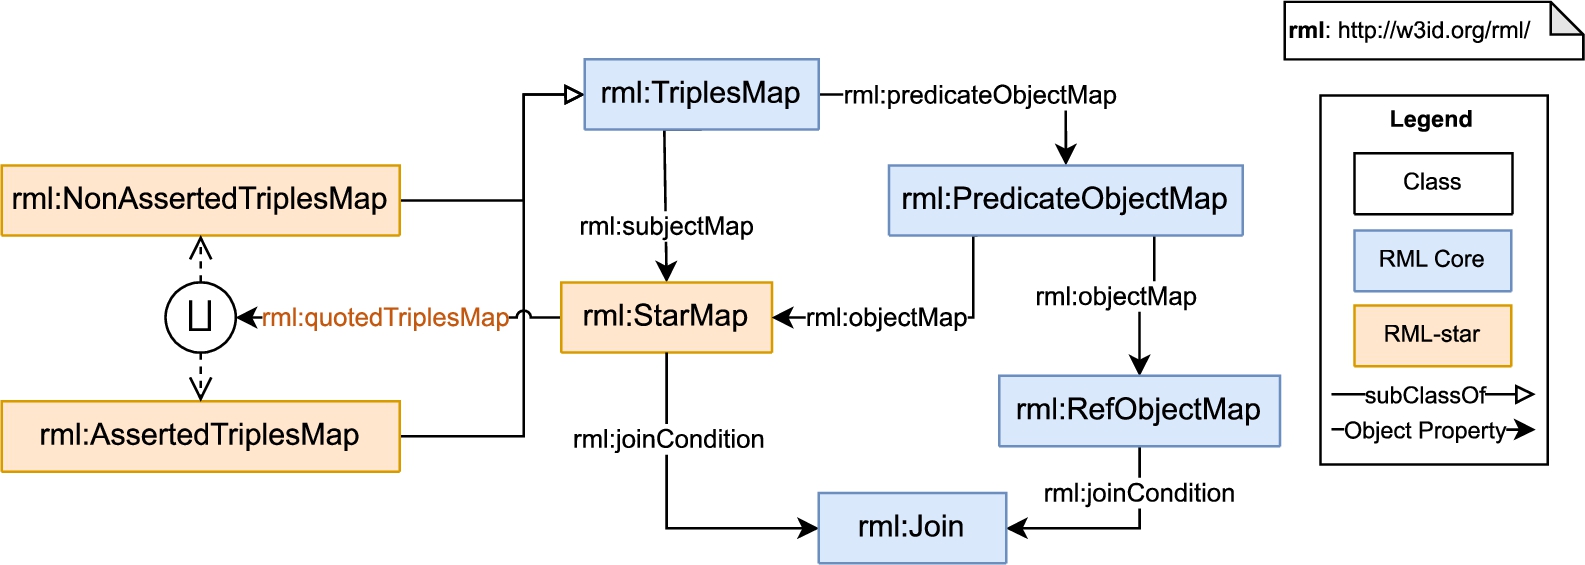 The RML-star module (represented using the Chowlk Visual Notation [16]). The RML-star resources are highlighted in orange, while the rest of the represented ontology belongs to the RML-Core module.4.